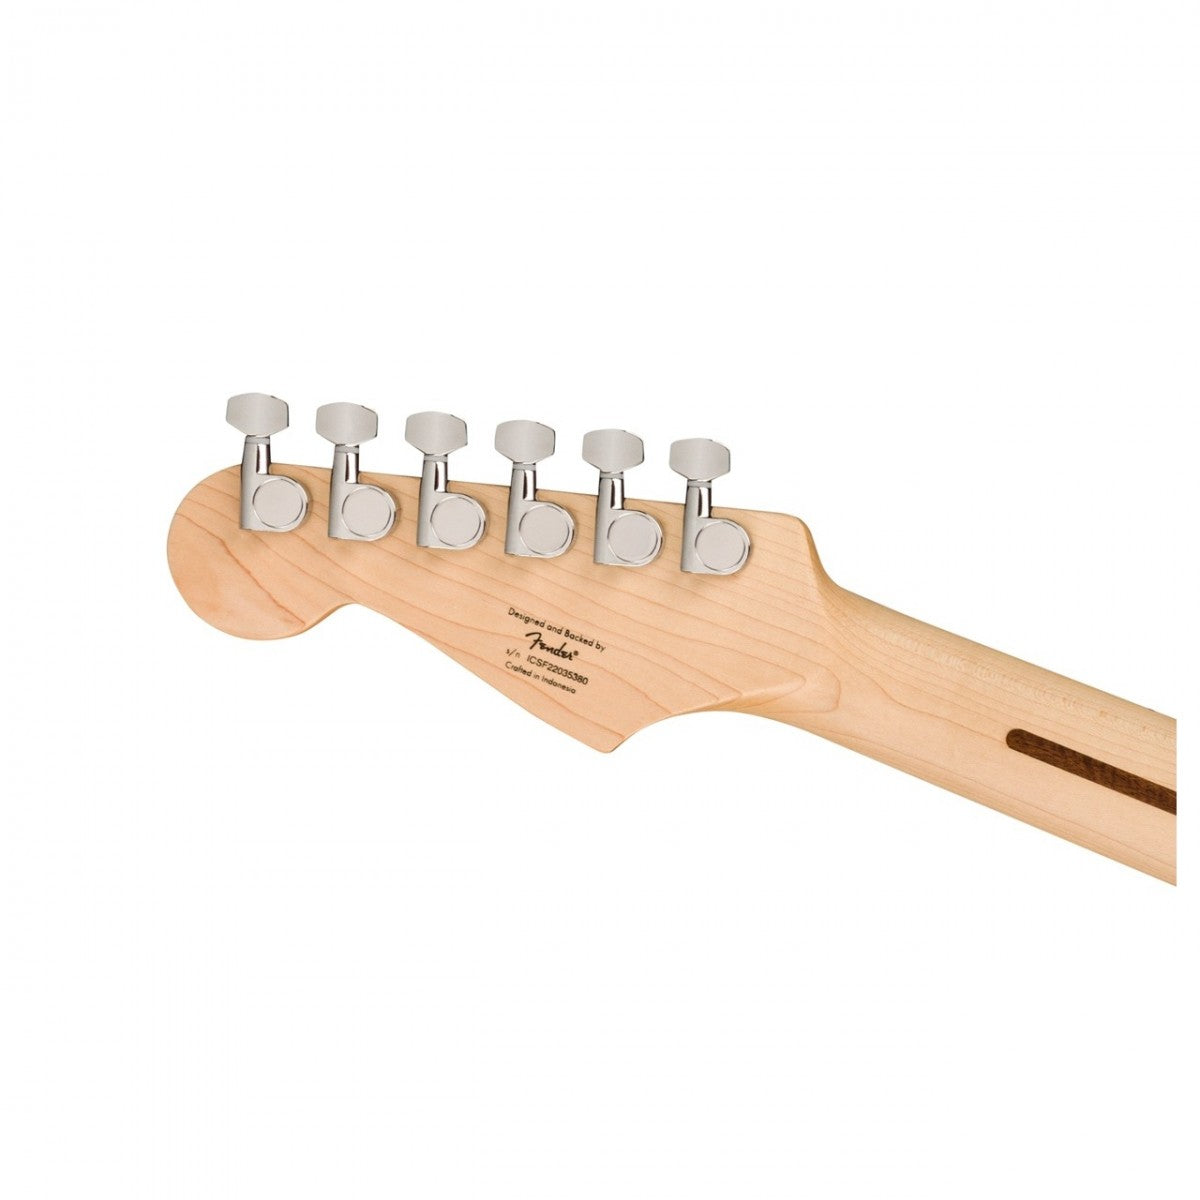 Squier Sonic Series Stratocaster HT Maple Fingerboard, Arctic White - Việt Music